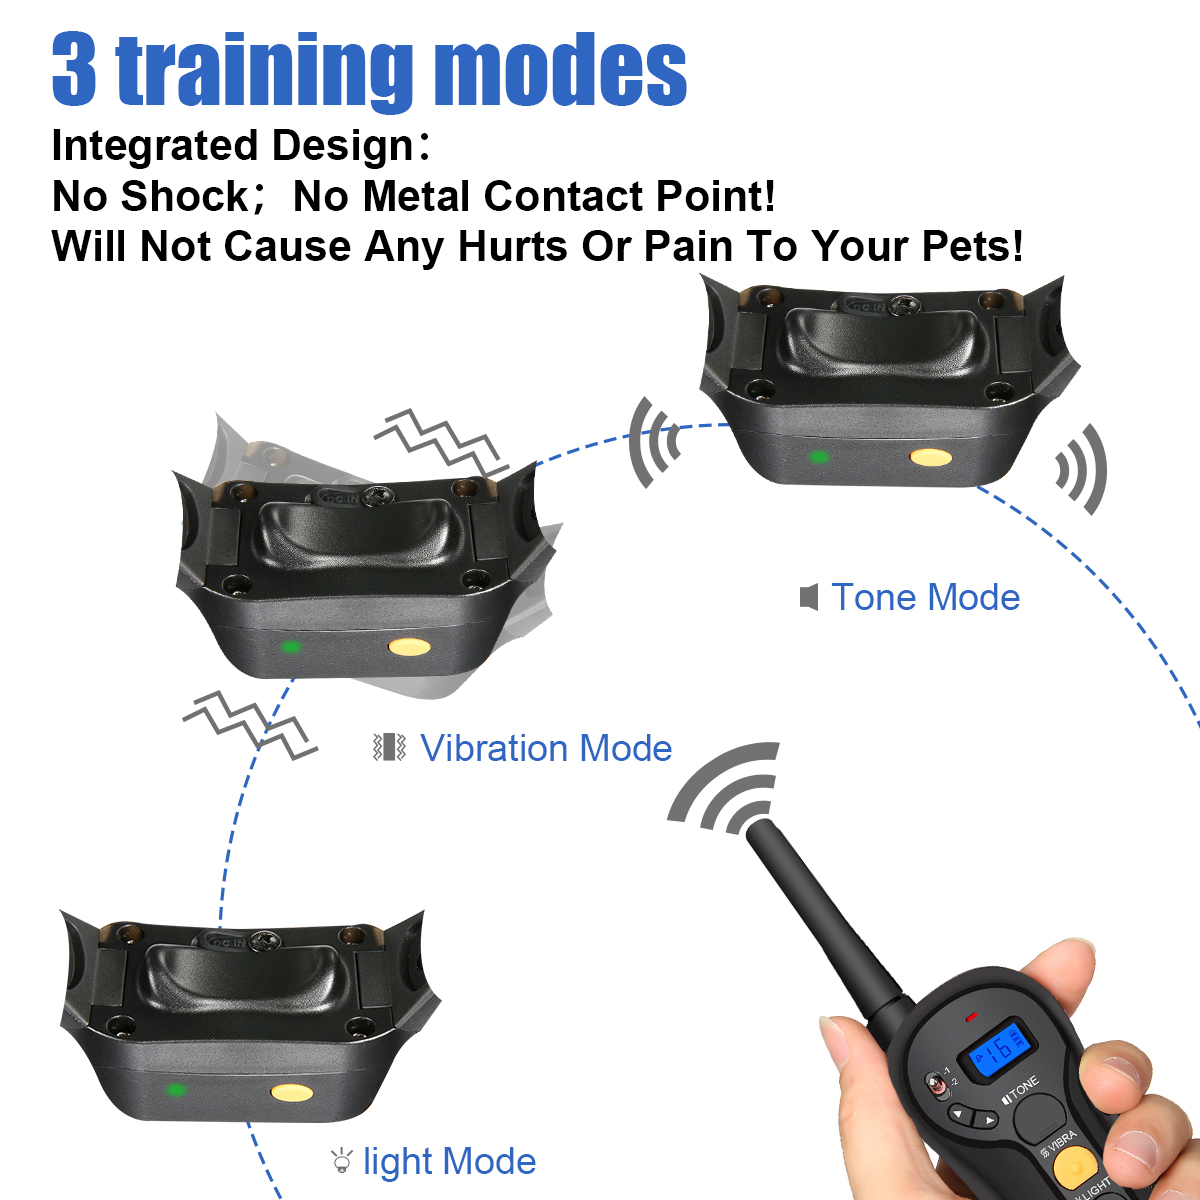 2x-Focuspet-LCD-Electric-Remote-Dog-Shock-Bark-Collar-Trainer-Training-IPX7-1305108-8